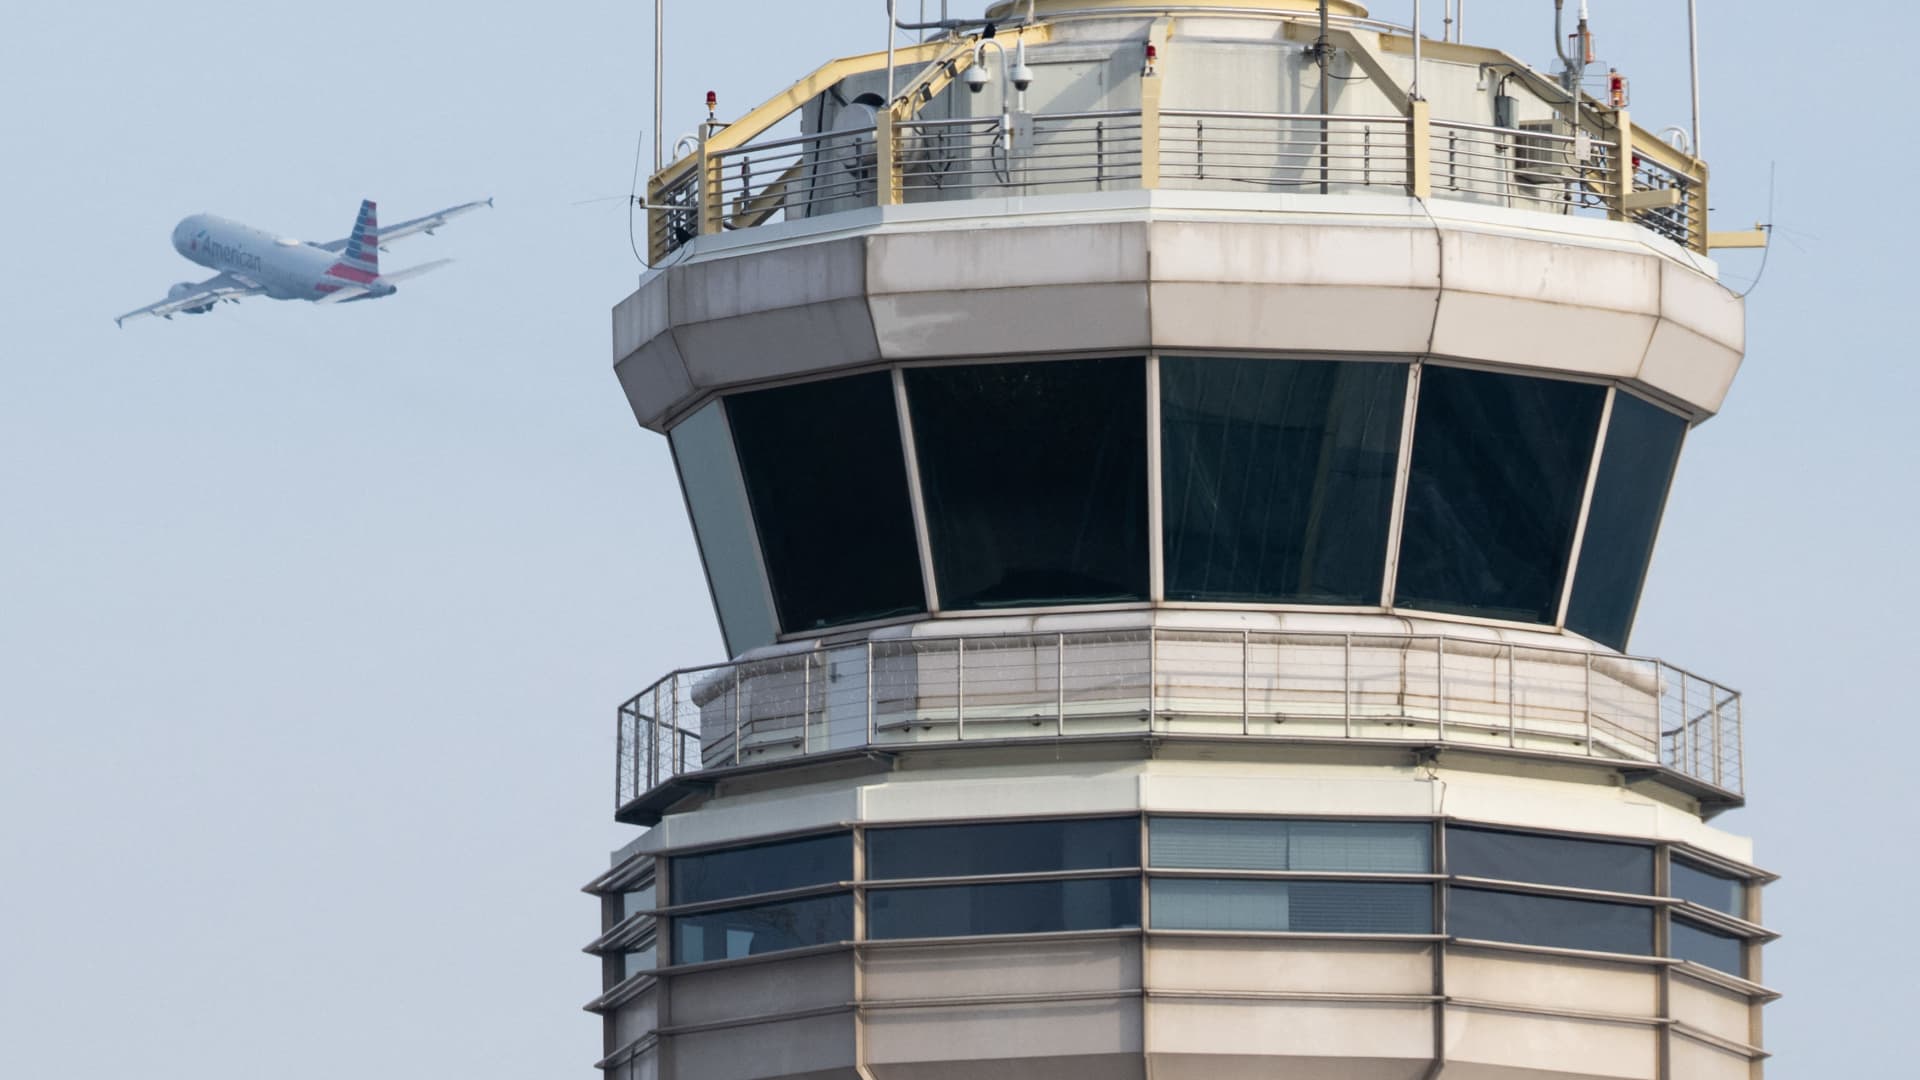 FAA contractor unintentionally deleted files before outage that disrupted flights